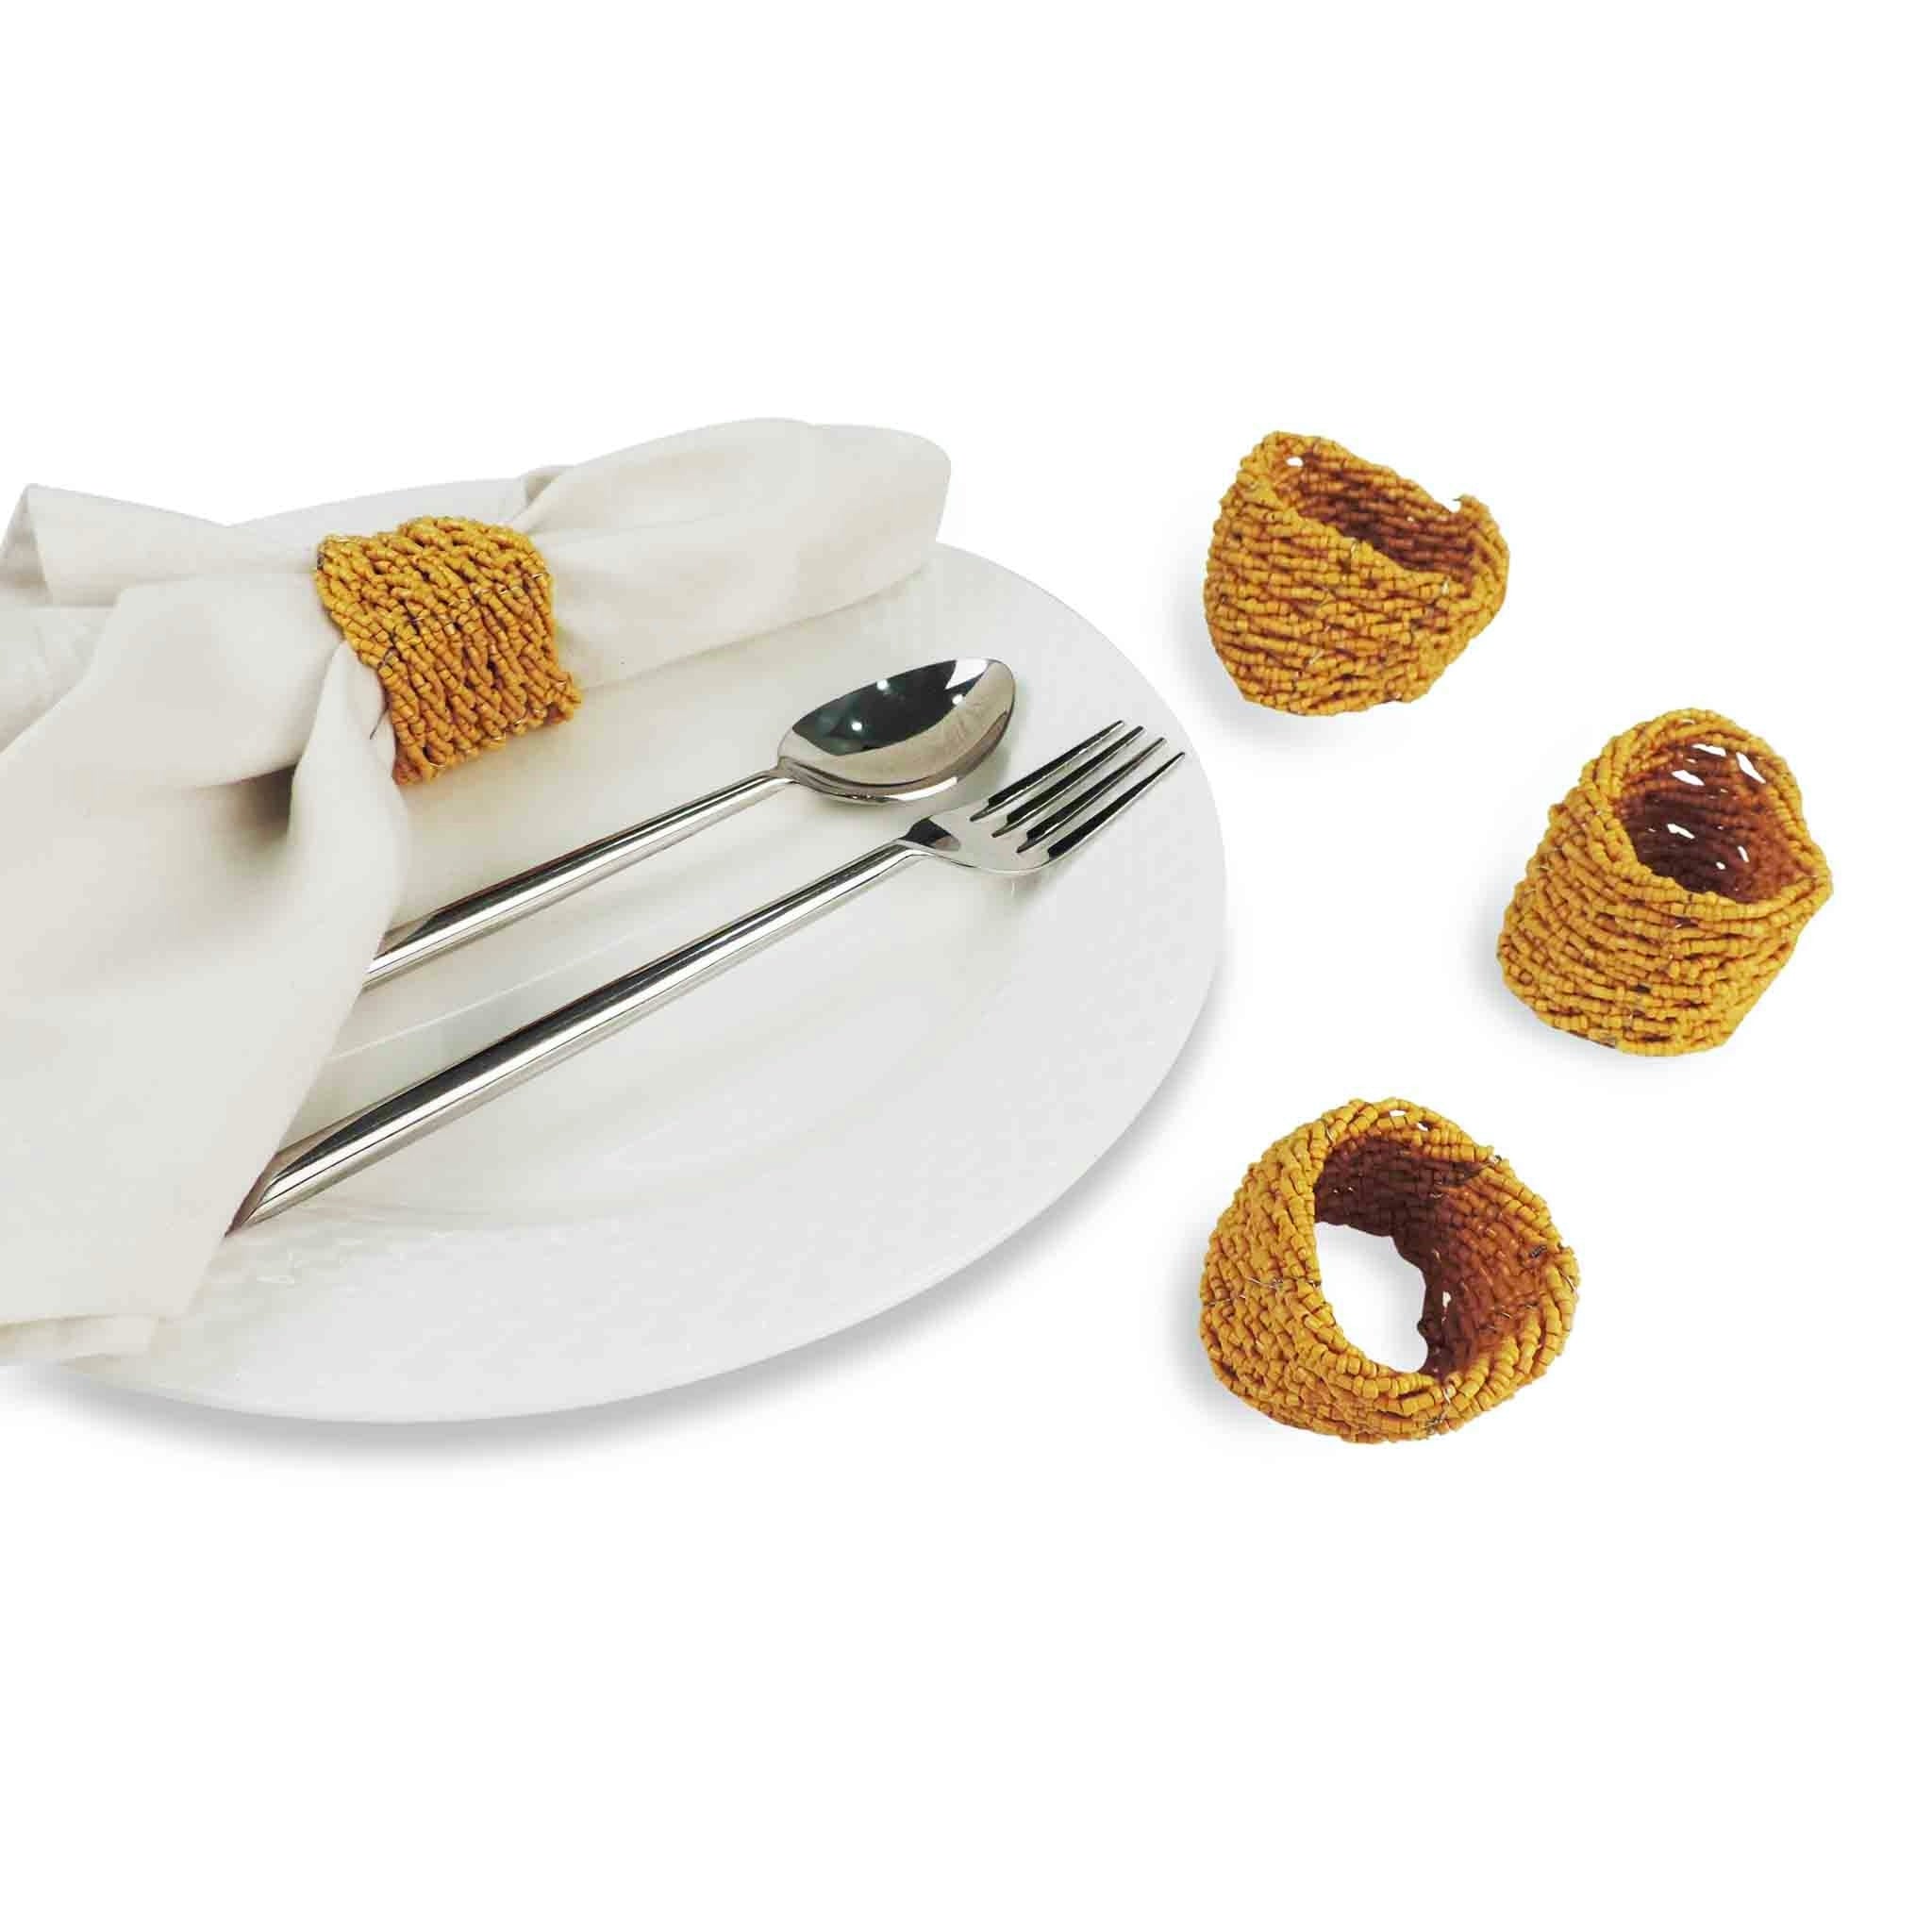 Jute Coil Napkin Ring in Yellow, Set of 4